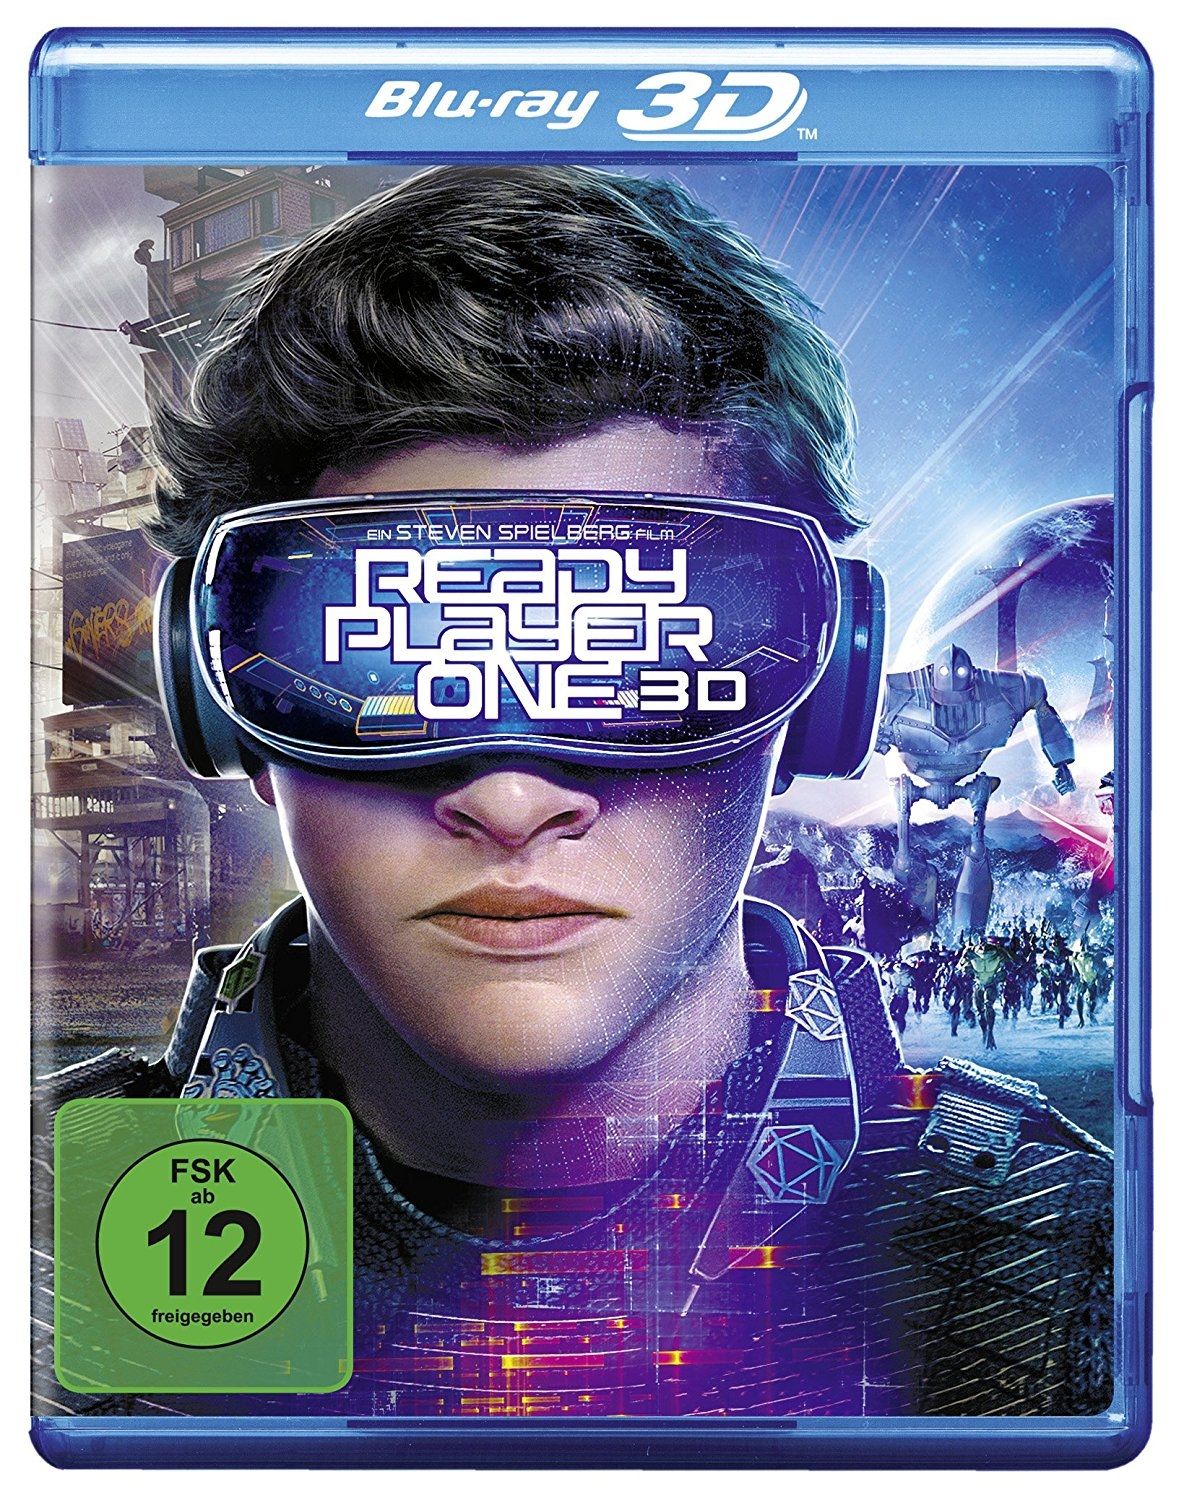 Ready Player One 3D (BLURAY 3D)